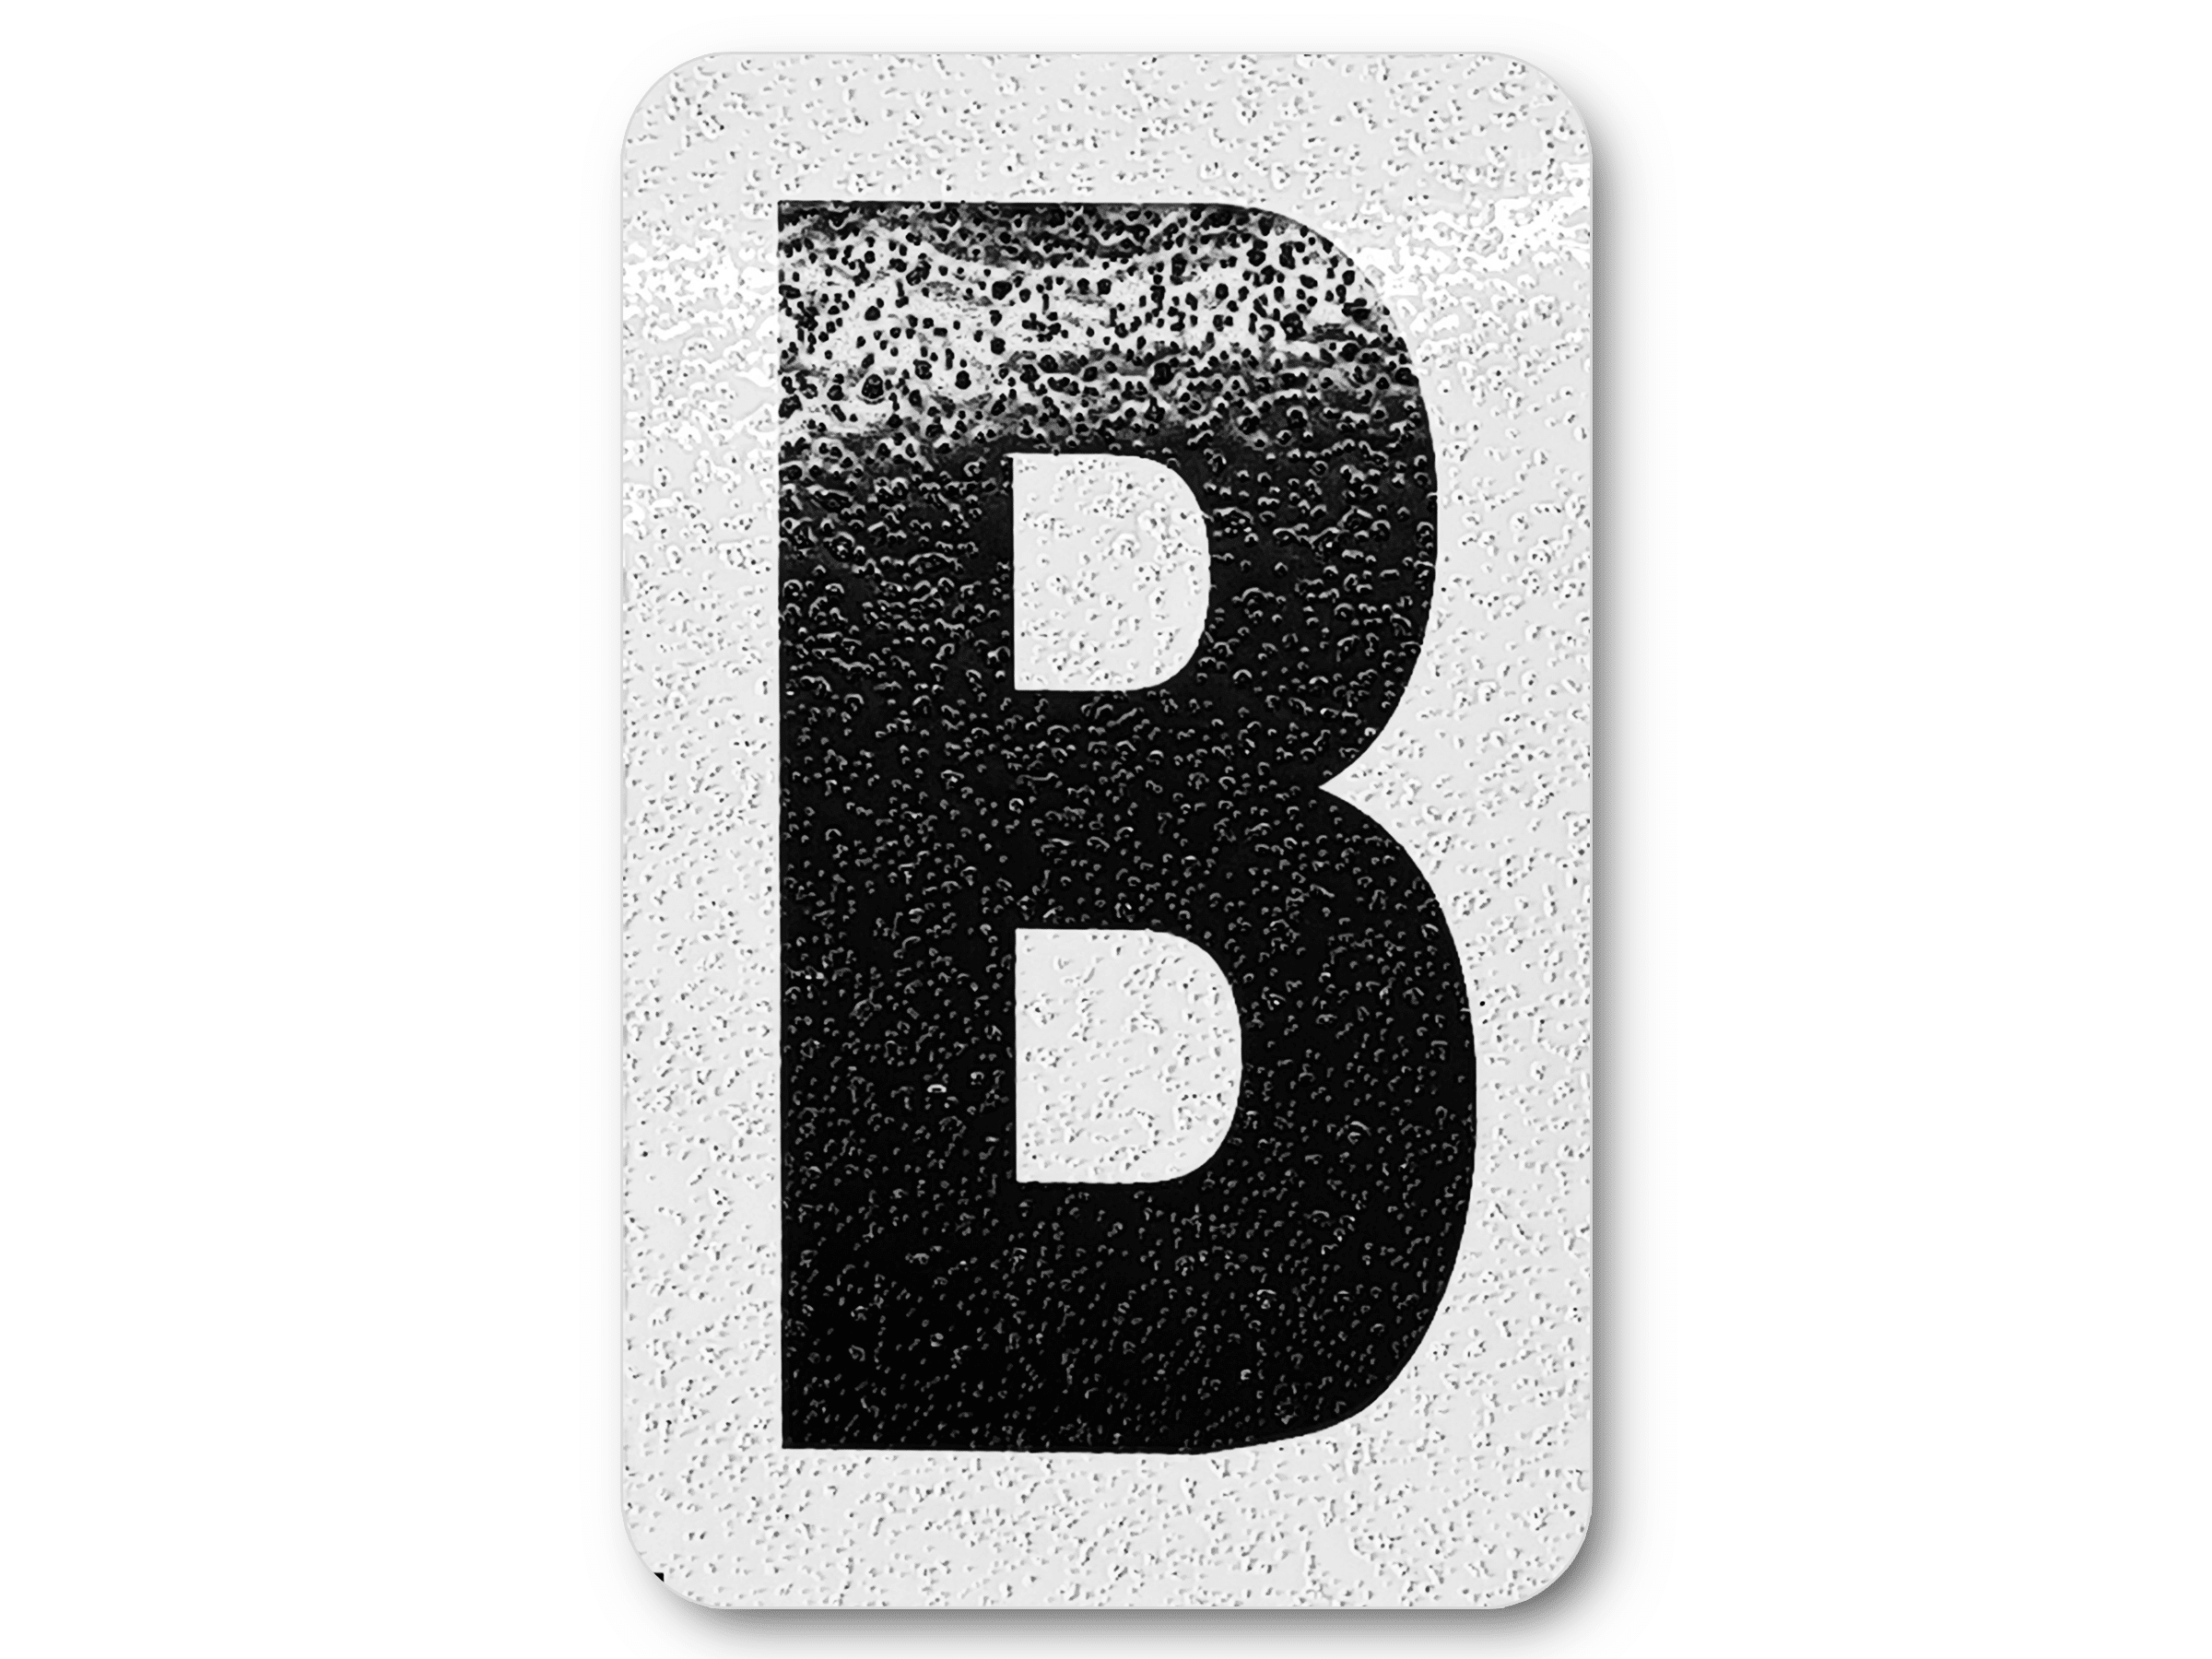  Bemeol 30 Sheets Large Letter Sickers 3 inch Vinyl Letter  Alphabet Number Stickers for Bulletin Board Classroom Mailbox Window Door  Home Decor(White) : Office Products